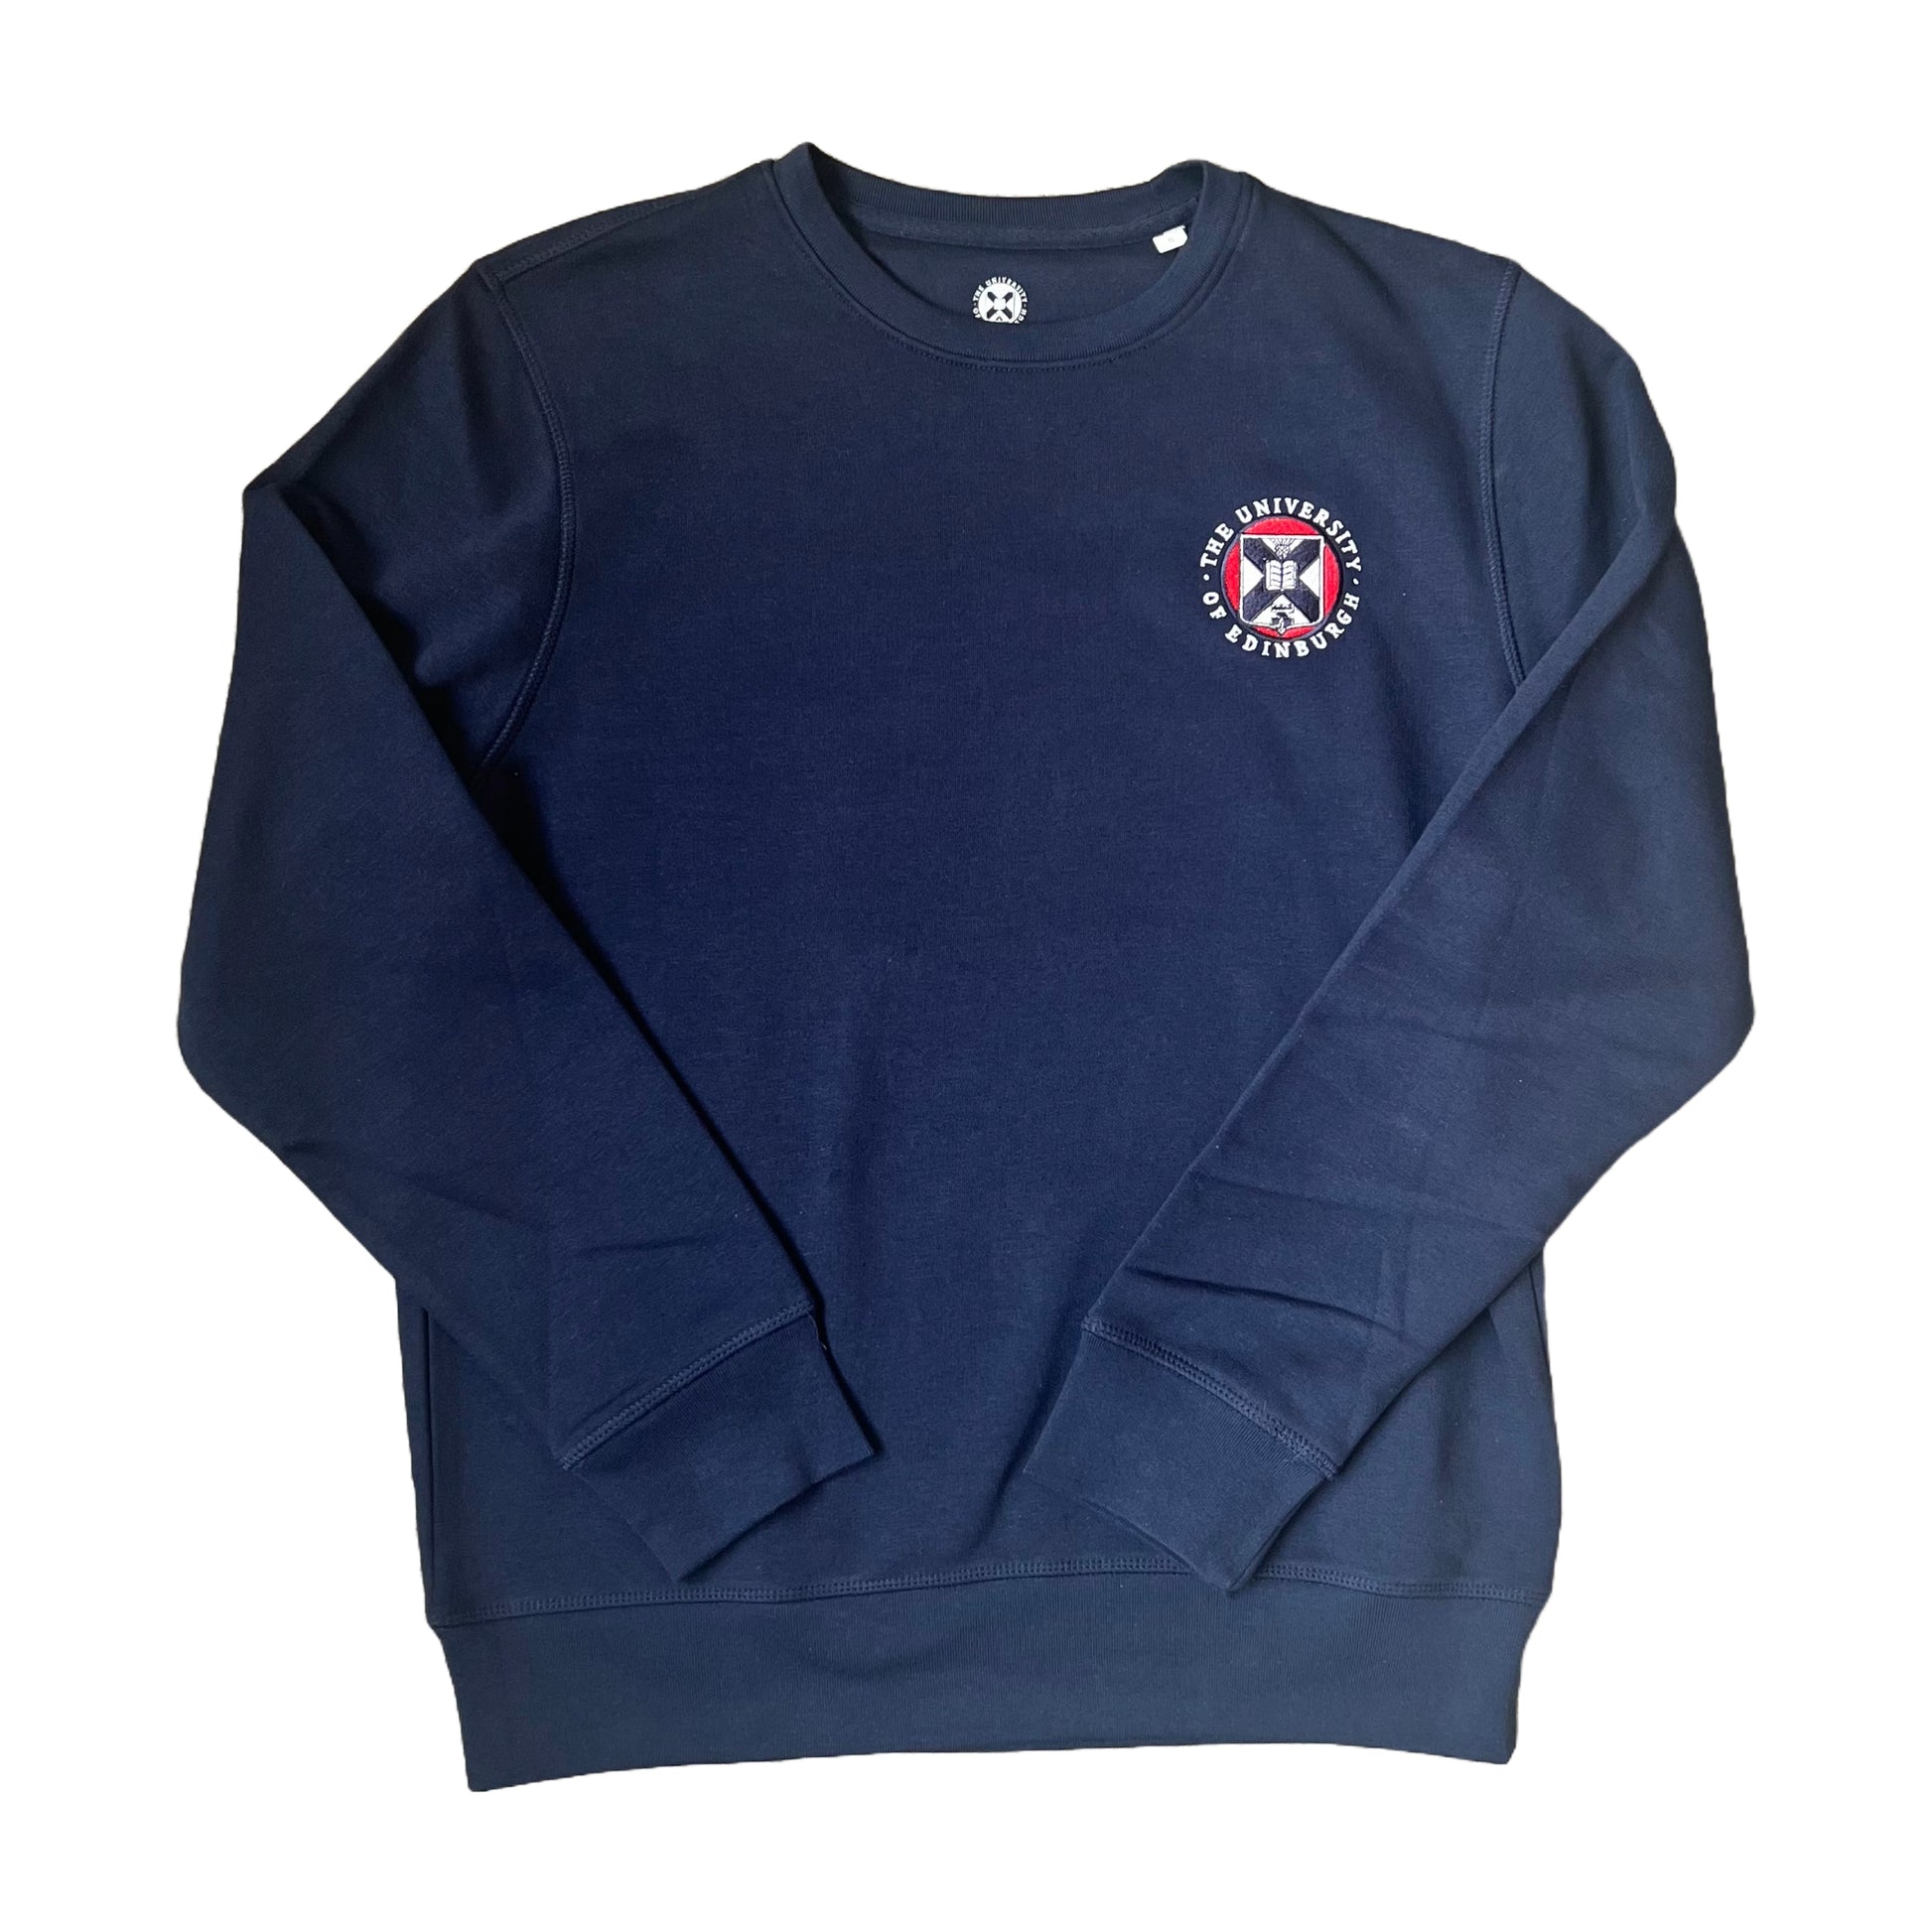 Navy crew neck sweatshirt with the University crest embroidered on the breast in full colour embroidery.